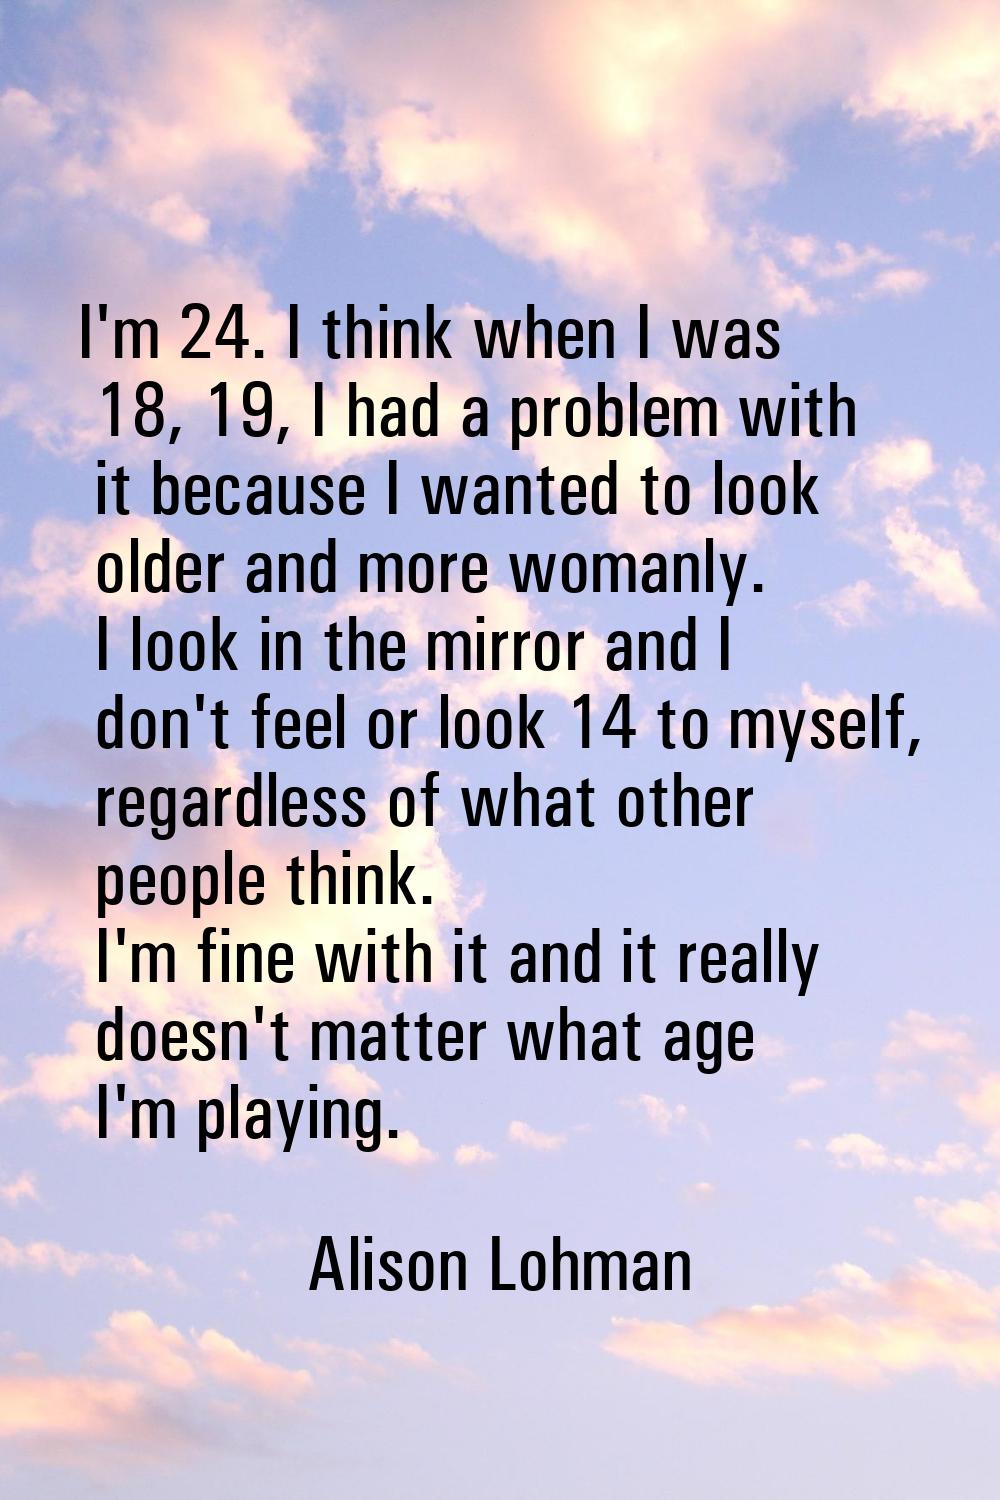 I'm 24. I think when I was 18, 19, I had a problem with it because I wanted to look older and more 